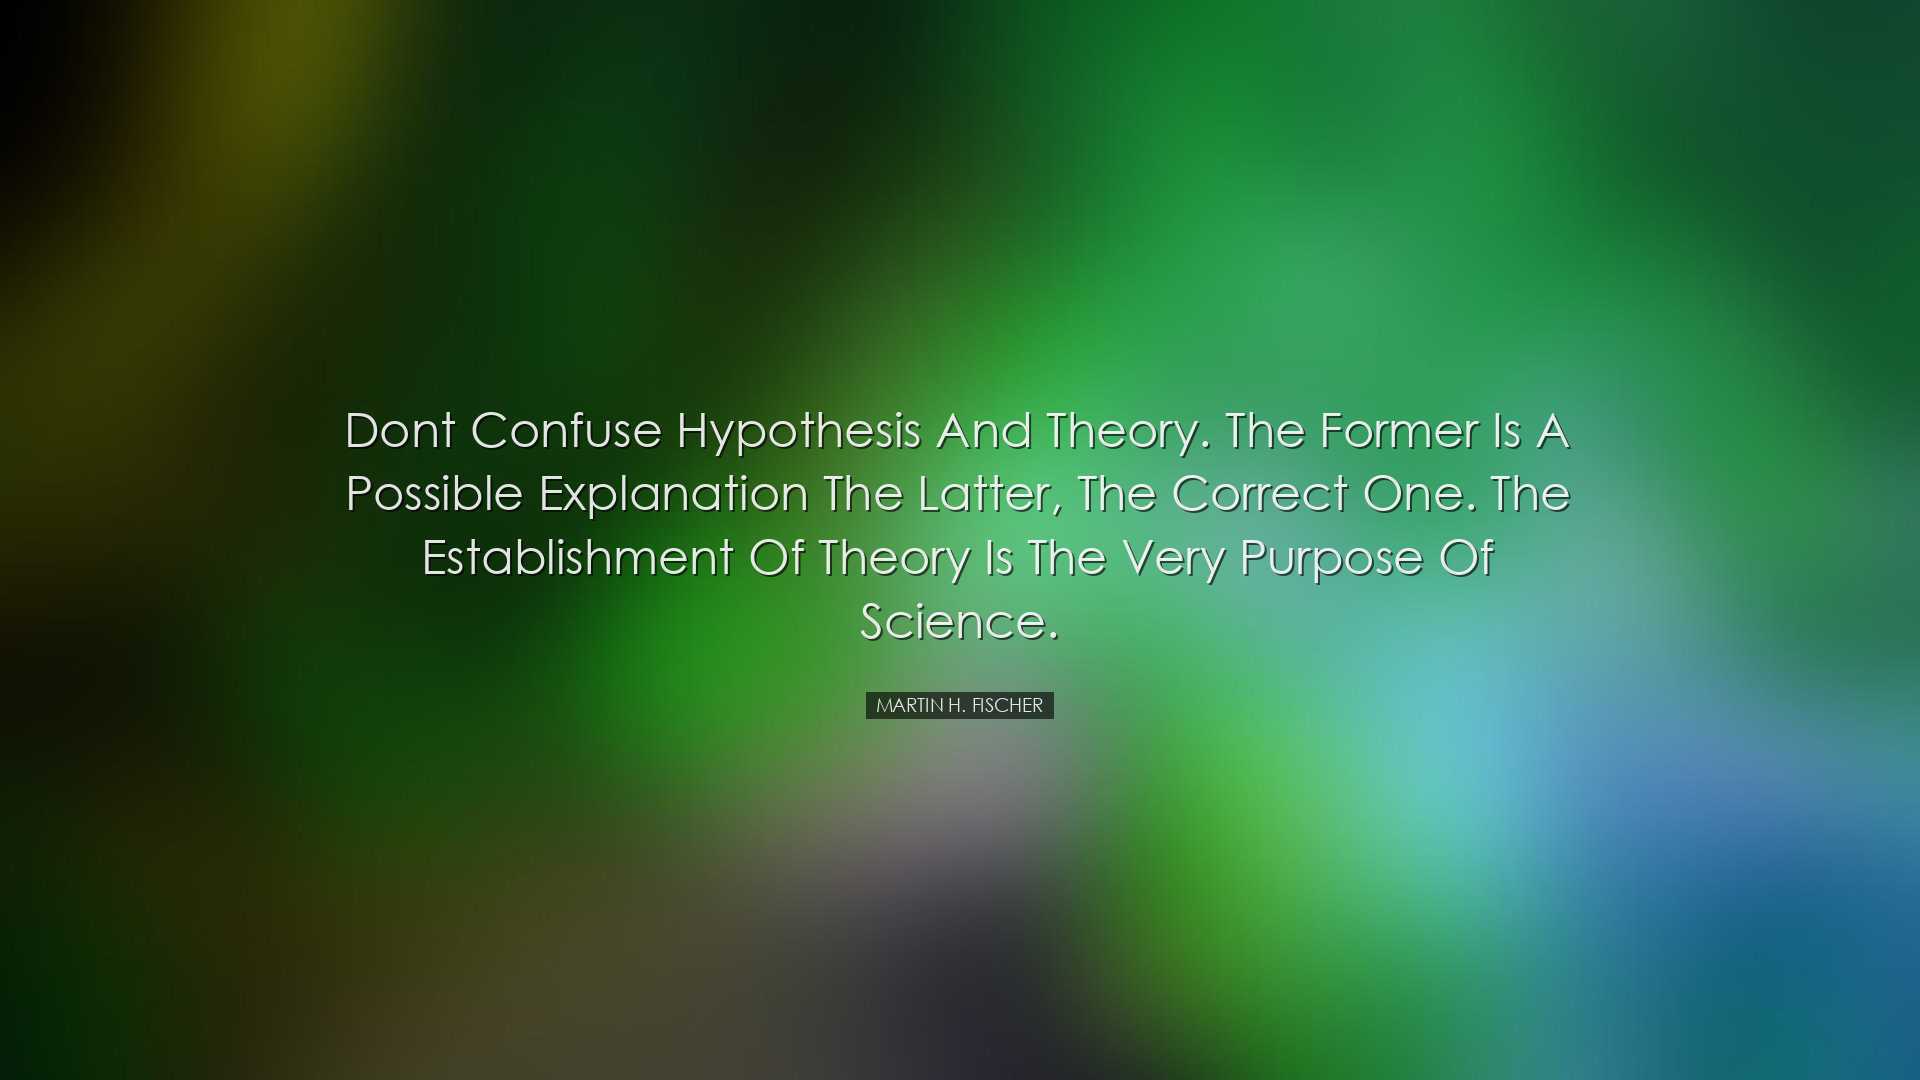 Dont confuse hypothesis and theory. The former is a possible expla